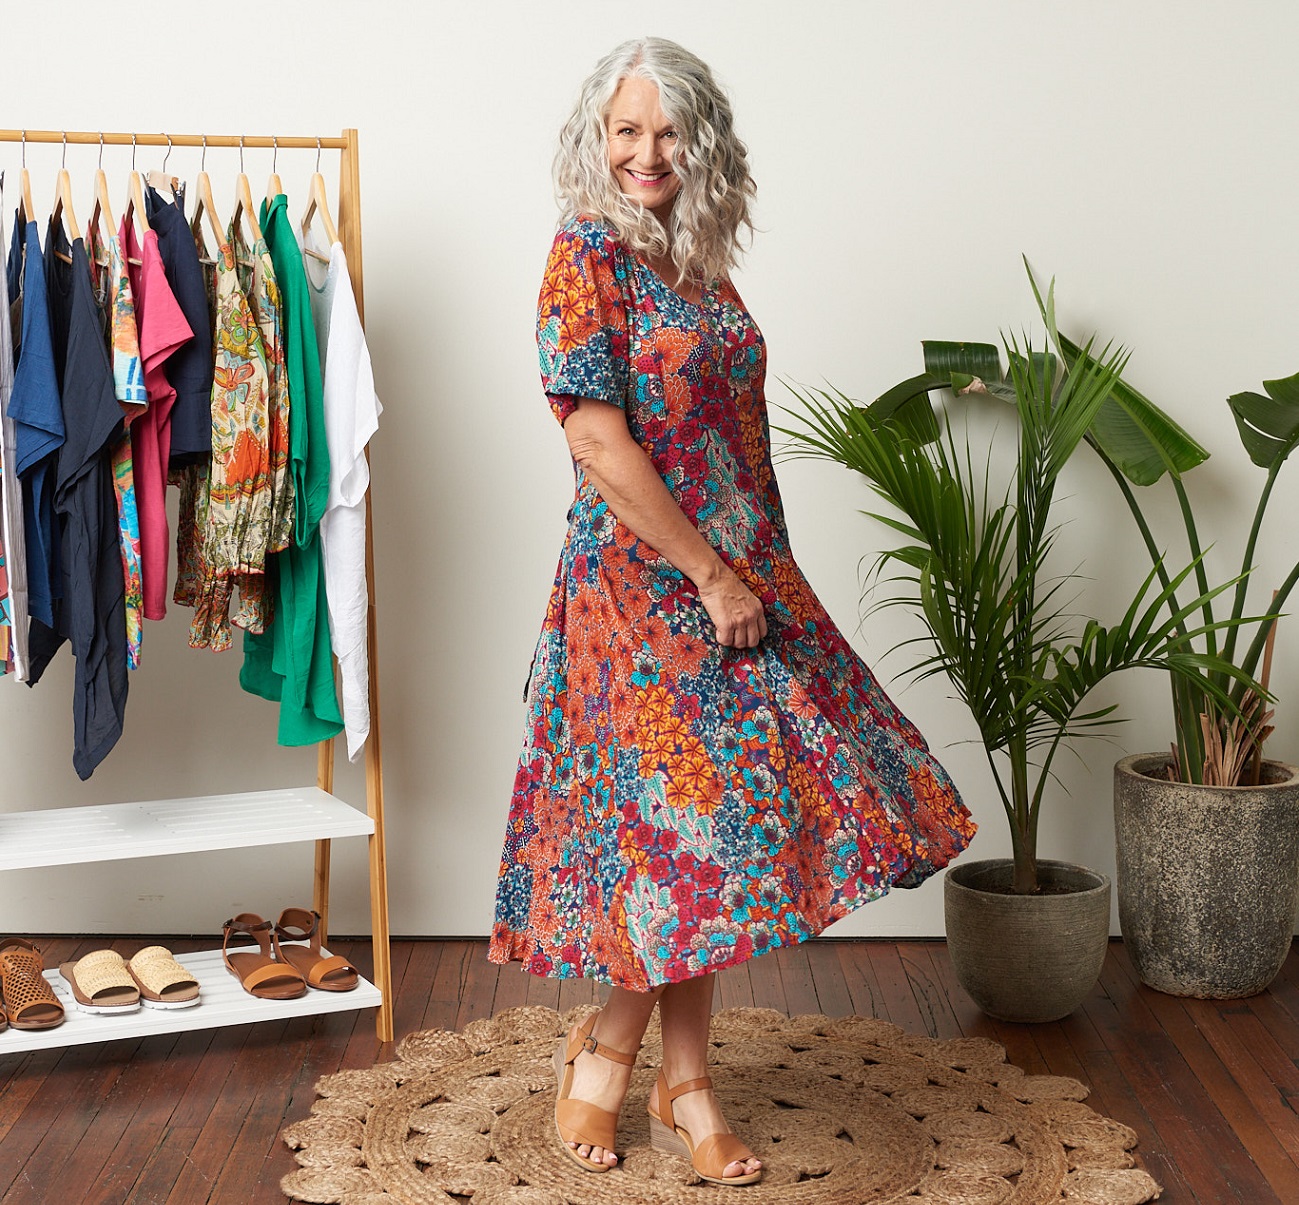 Starts at 60 pushes into mature women's fashion and footwear - retailbiz